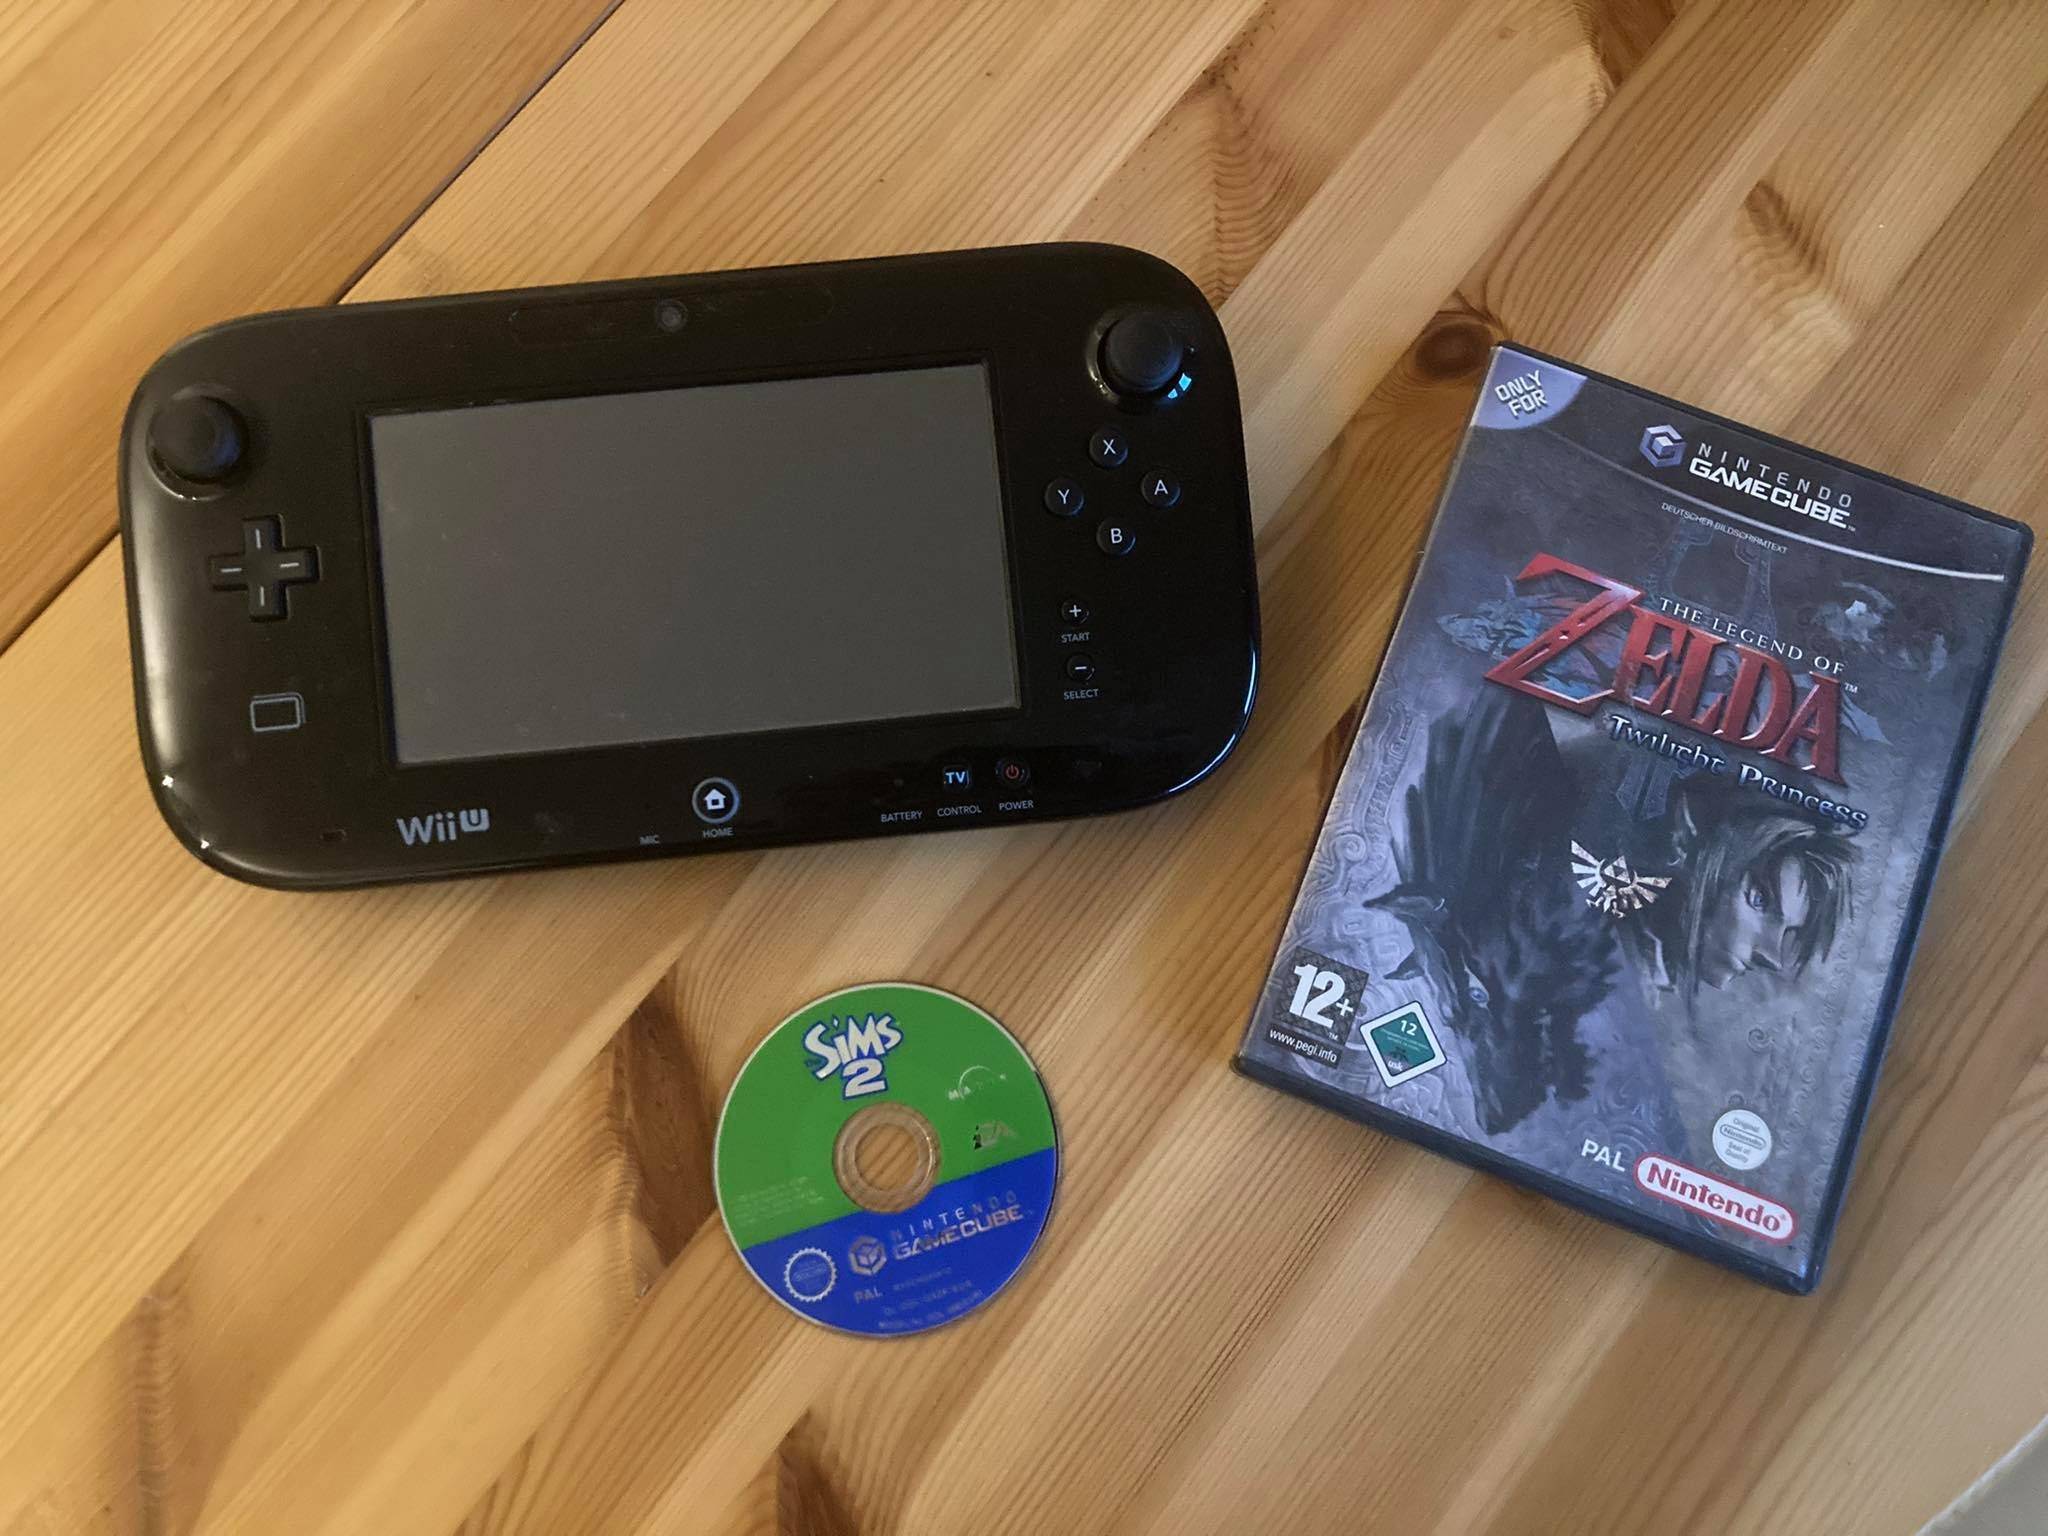 How To Play Gamecube Games On Your Wii U With Nintendont